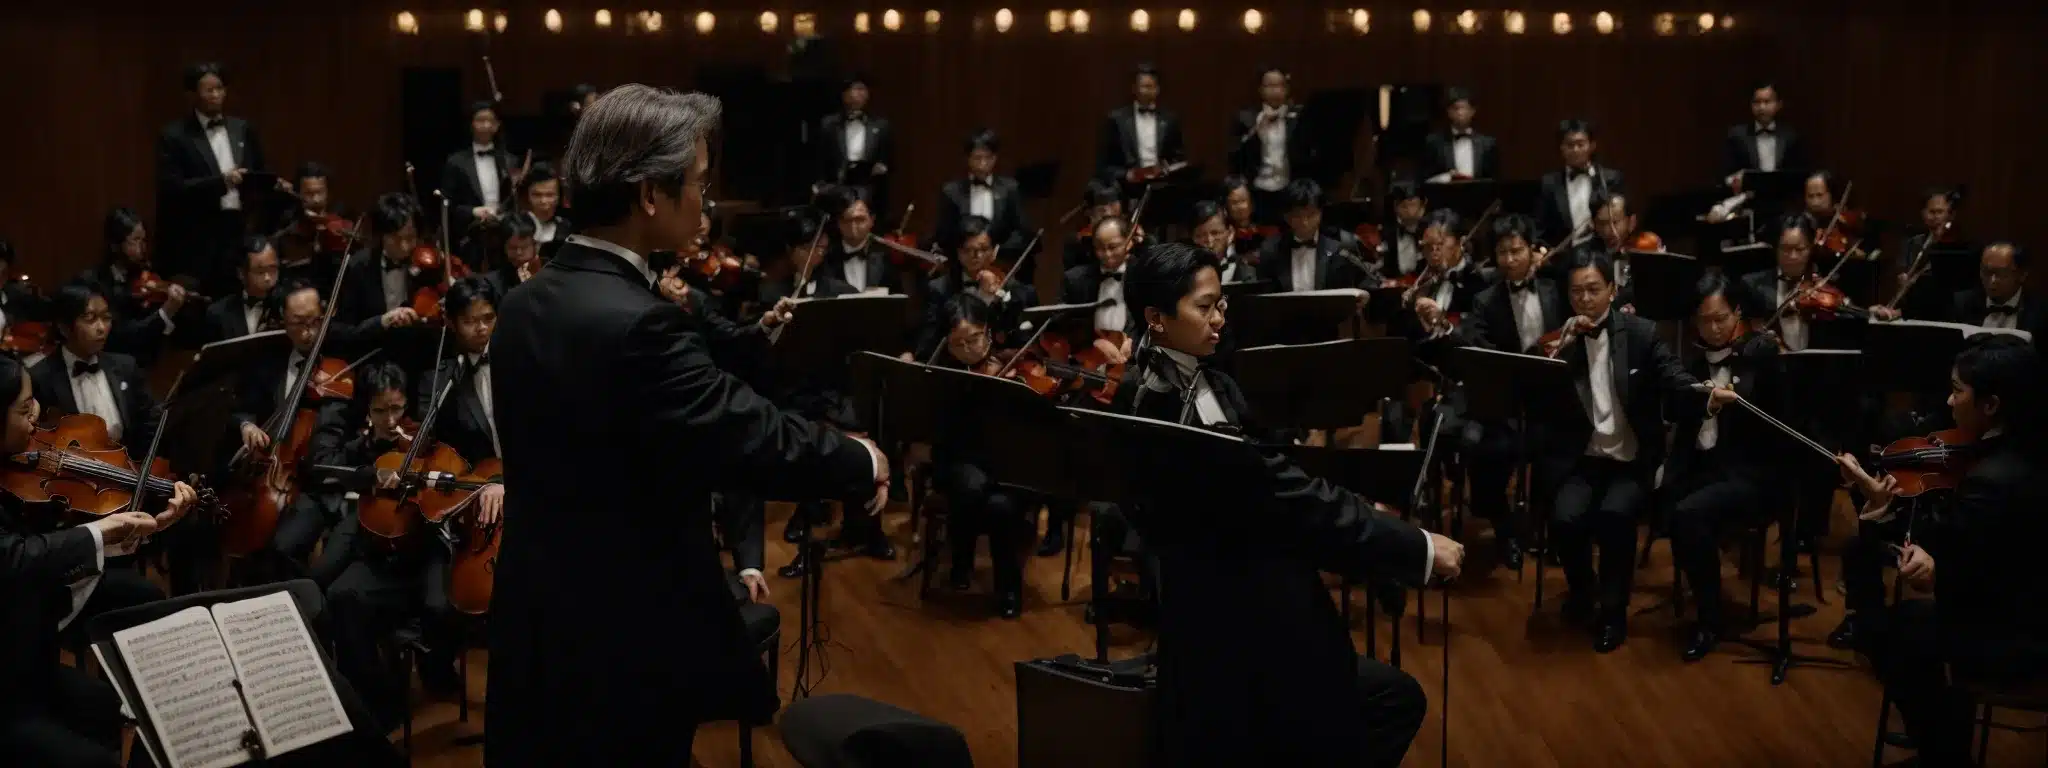 A Conductor Leading A Harmonious Orchestra Embodies The Theme Of Synchronization.